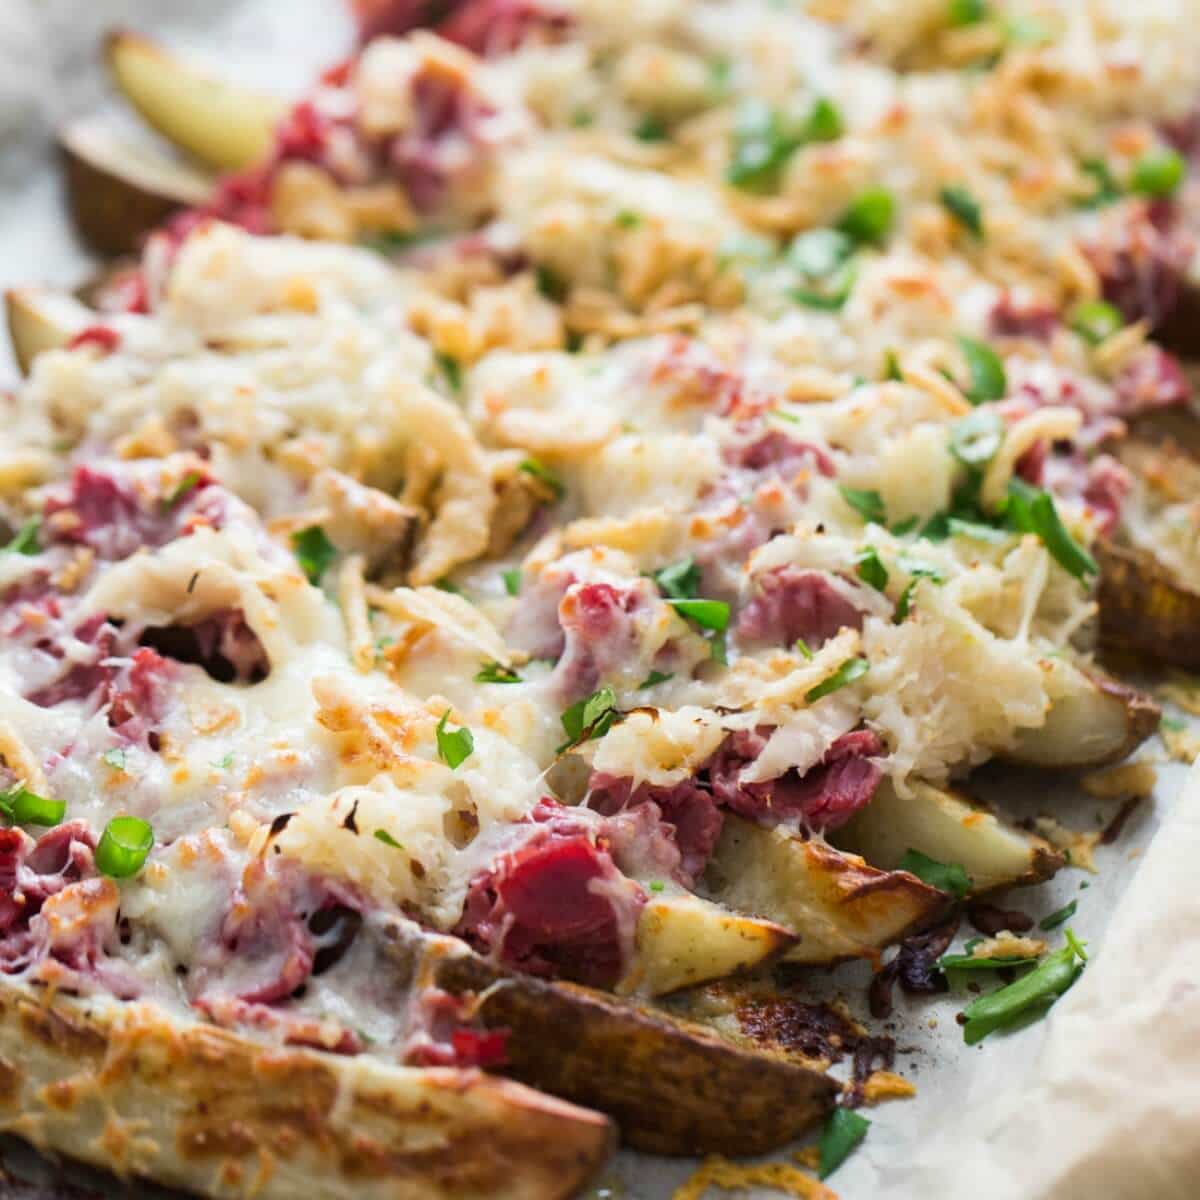 This loaded potatoes recipe is so good! Classic reuben ingredients are a piled high on top of crispy potato wedges!